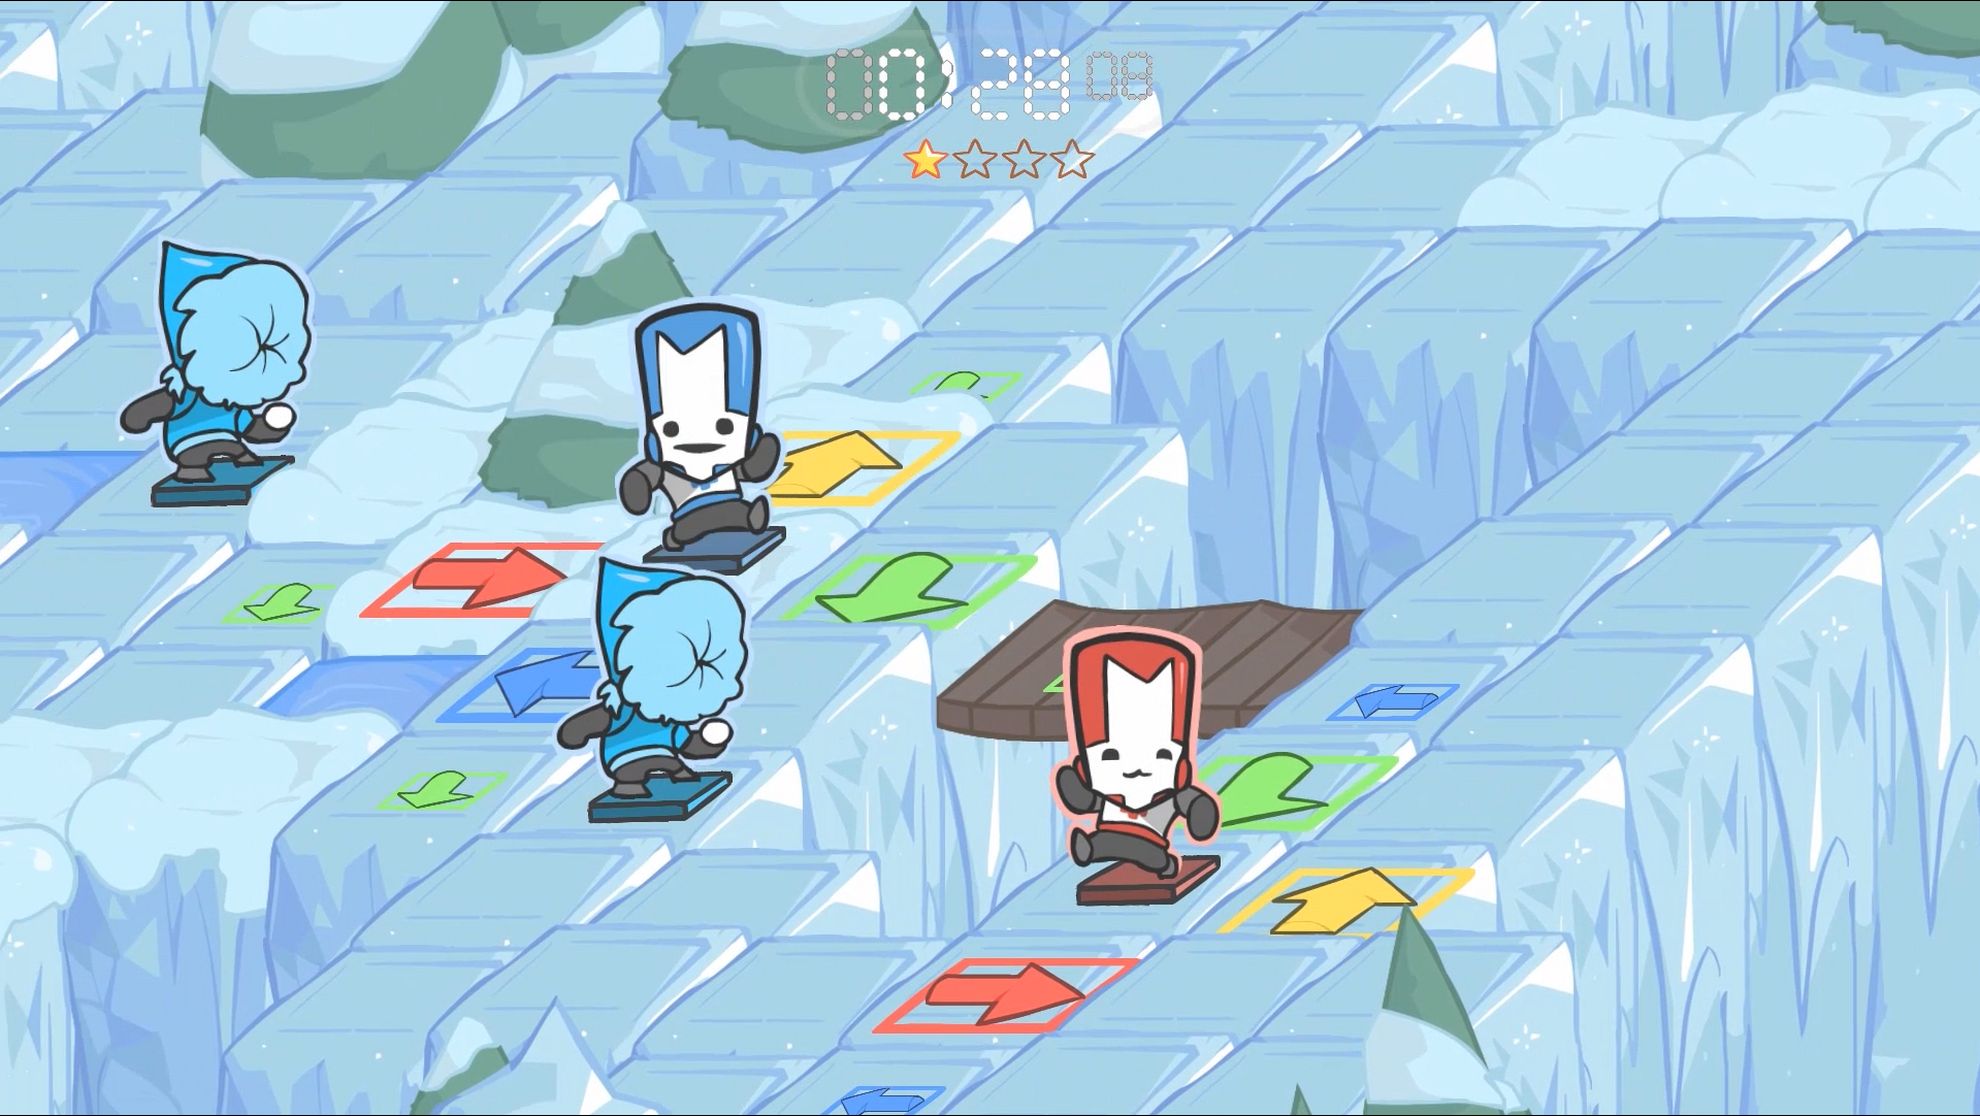 castle.crashers remastered achievement guide and roadmap